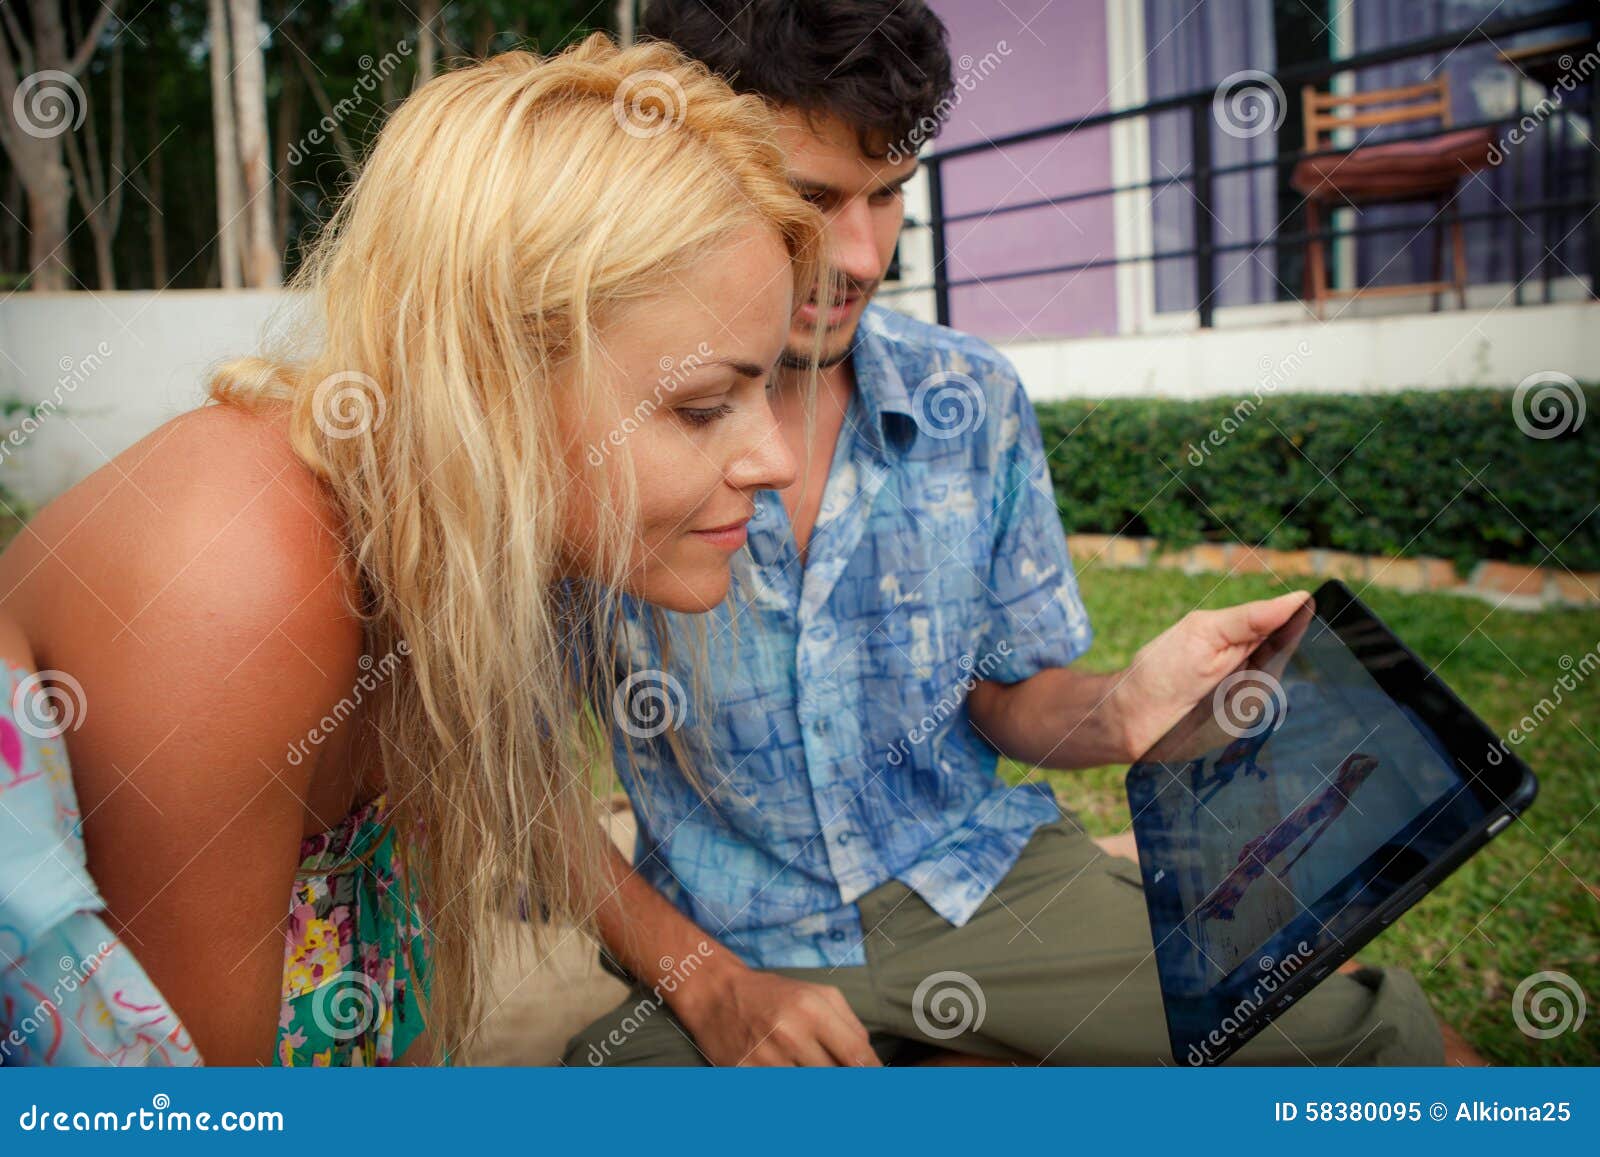 Blonde Girl And Brunette Guy Look Into Ipad Stock Image Image Of 